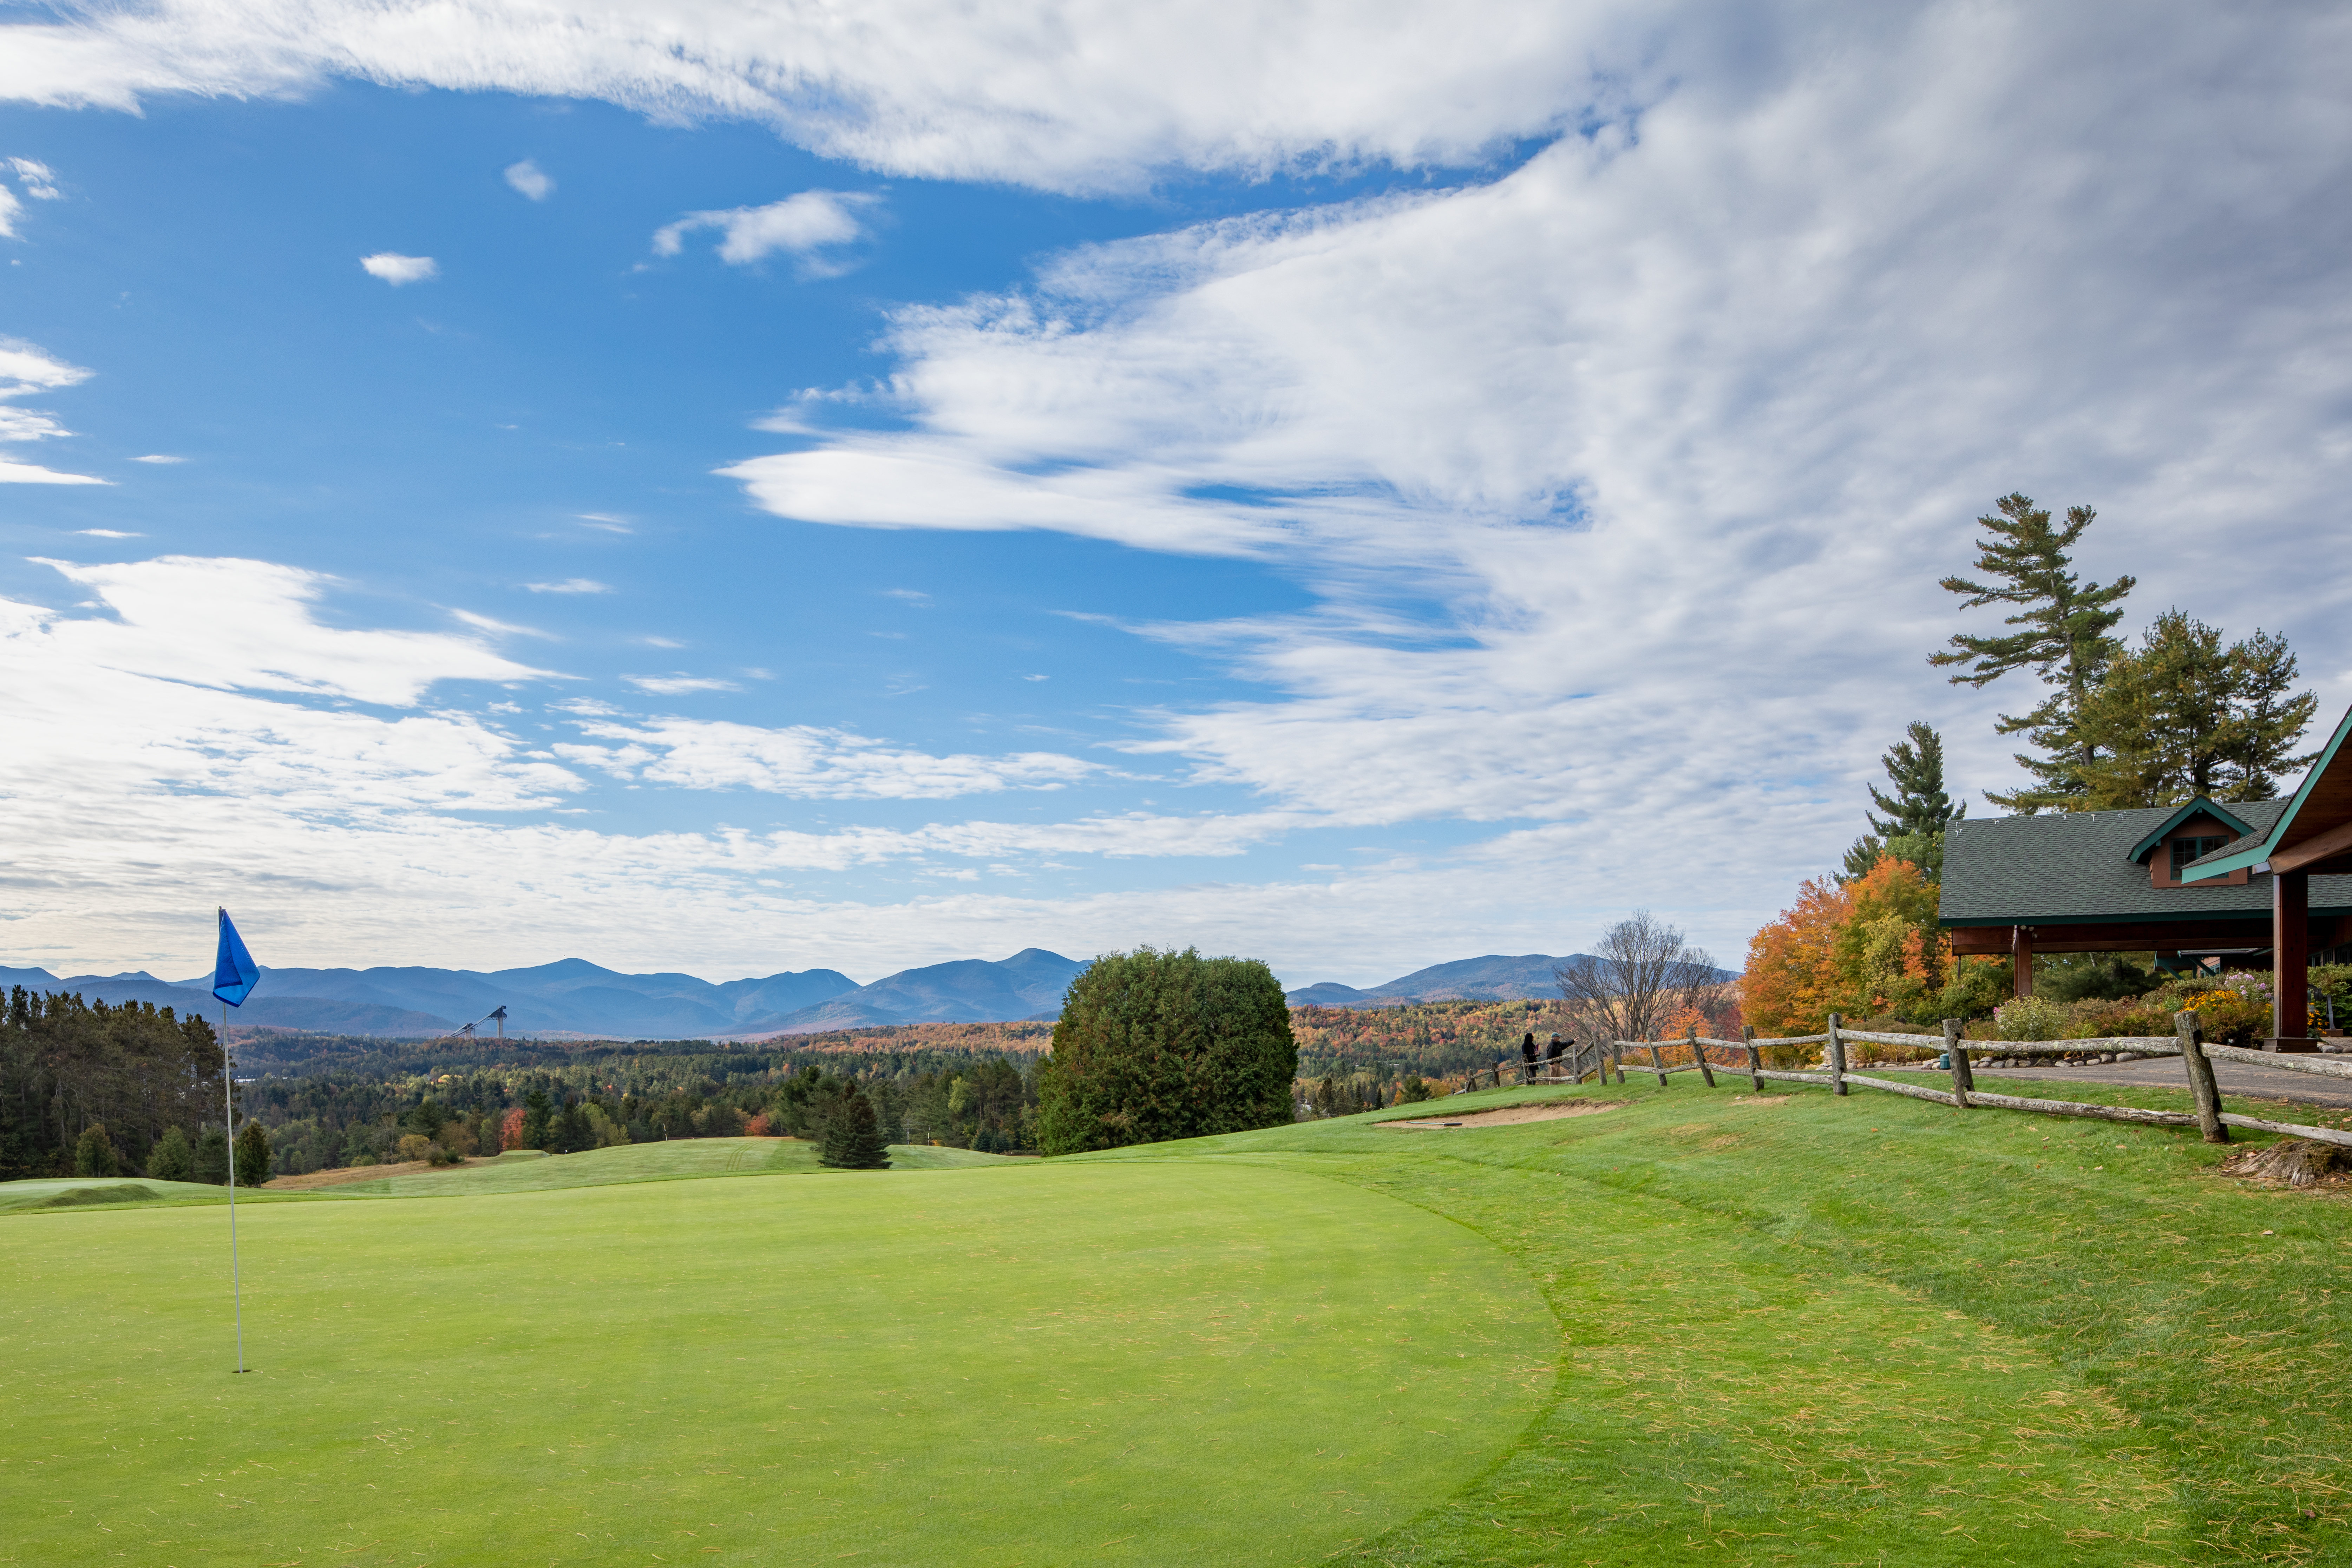 Our 18th hole is just steps from our Lake Placid Club